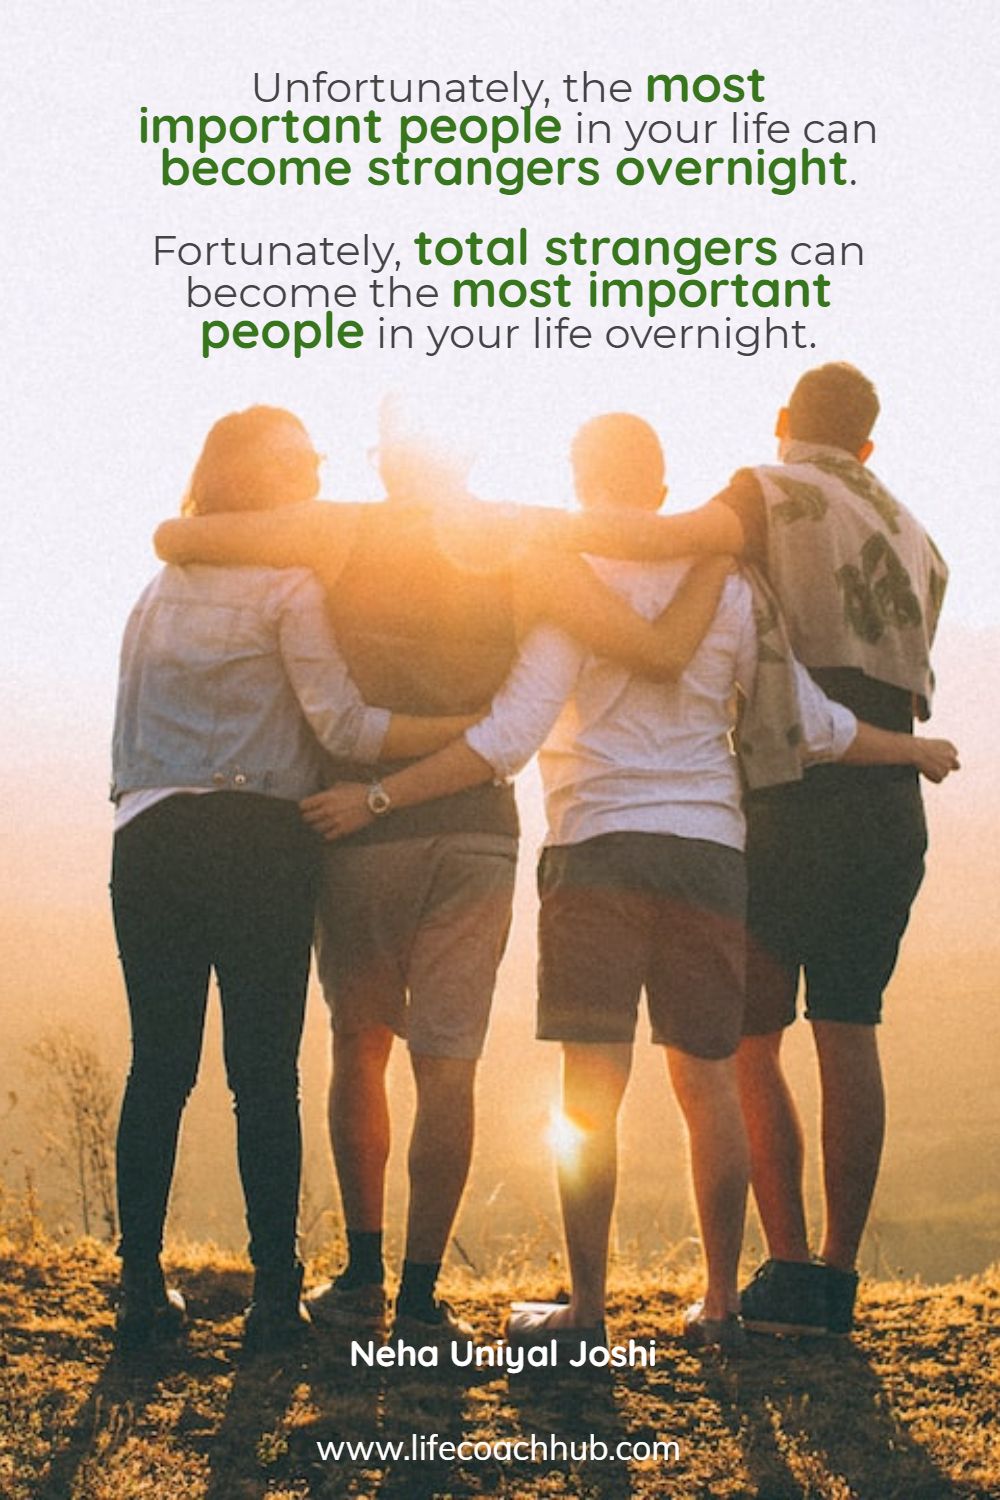 Unfortunately, the most important people in your life can become strangers overnight. Fortunately, total strangers can become the most important people in your life overnight. Neha Joshi Coaching Quote